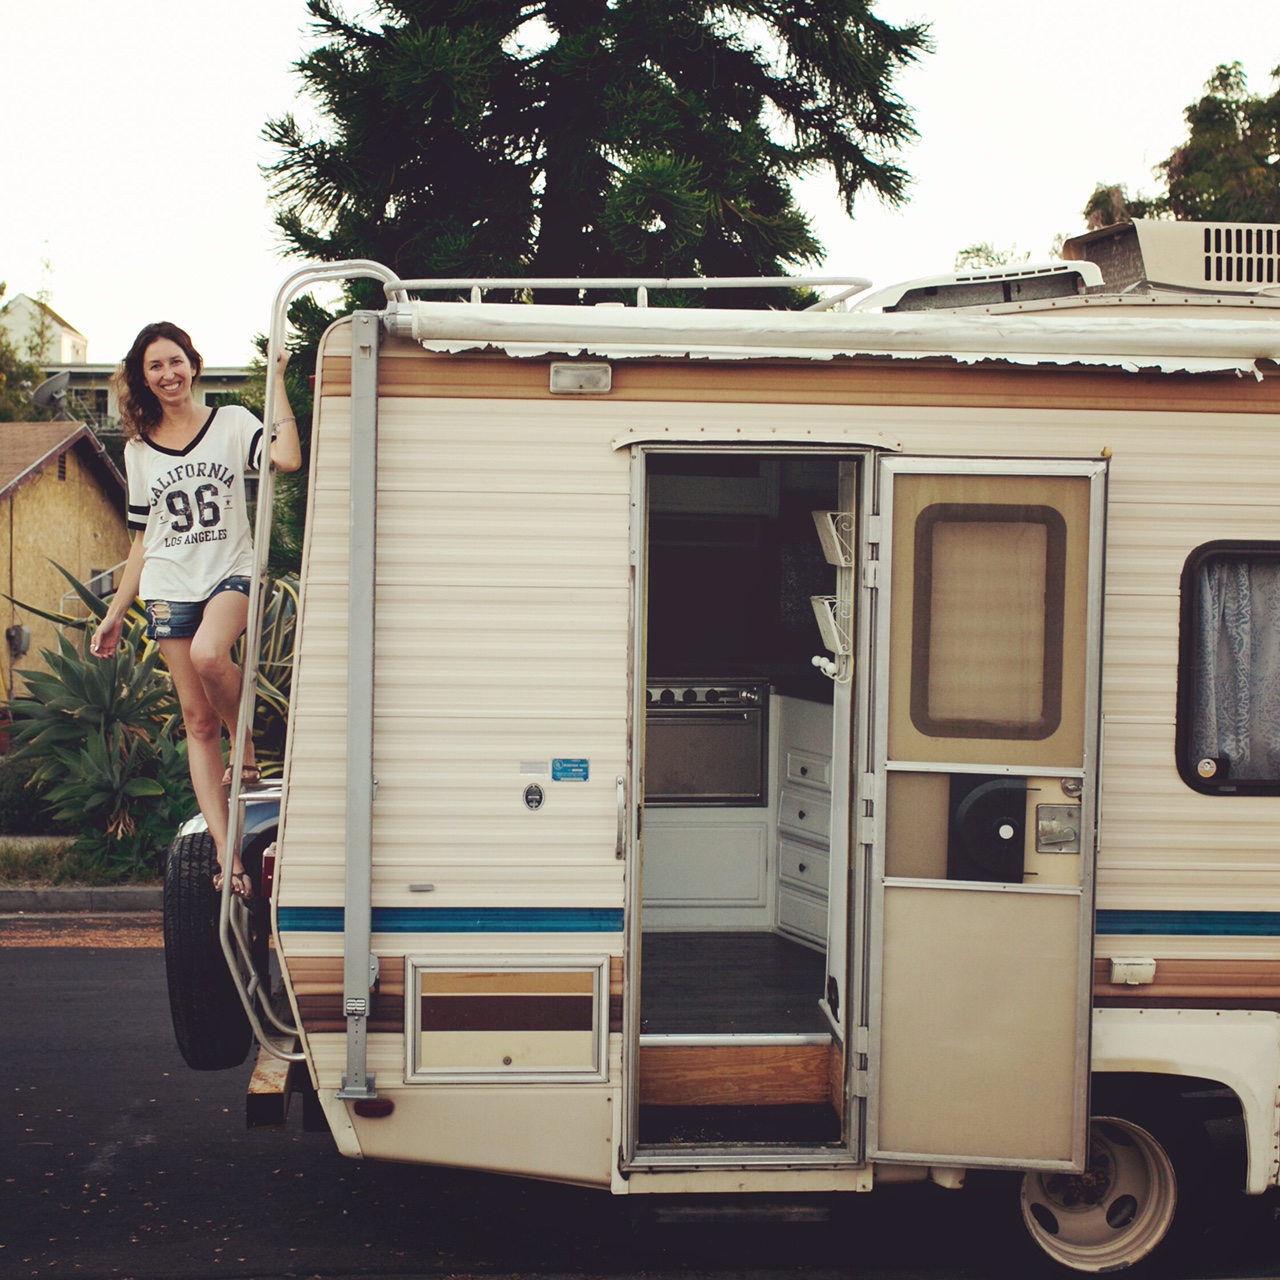 Rachel and her RV—ready for some epic adventures